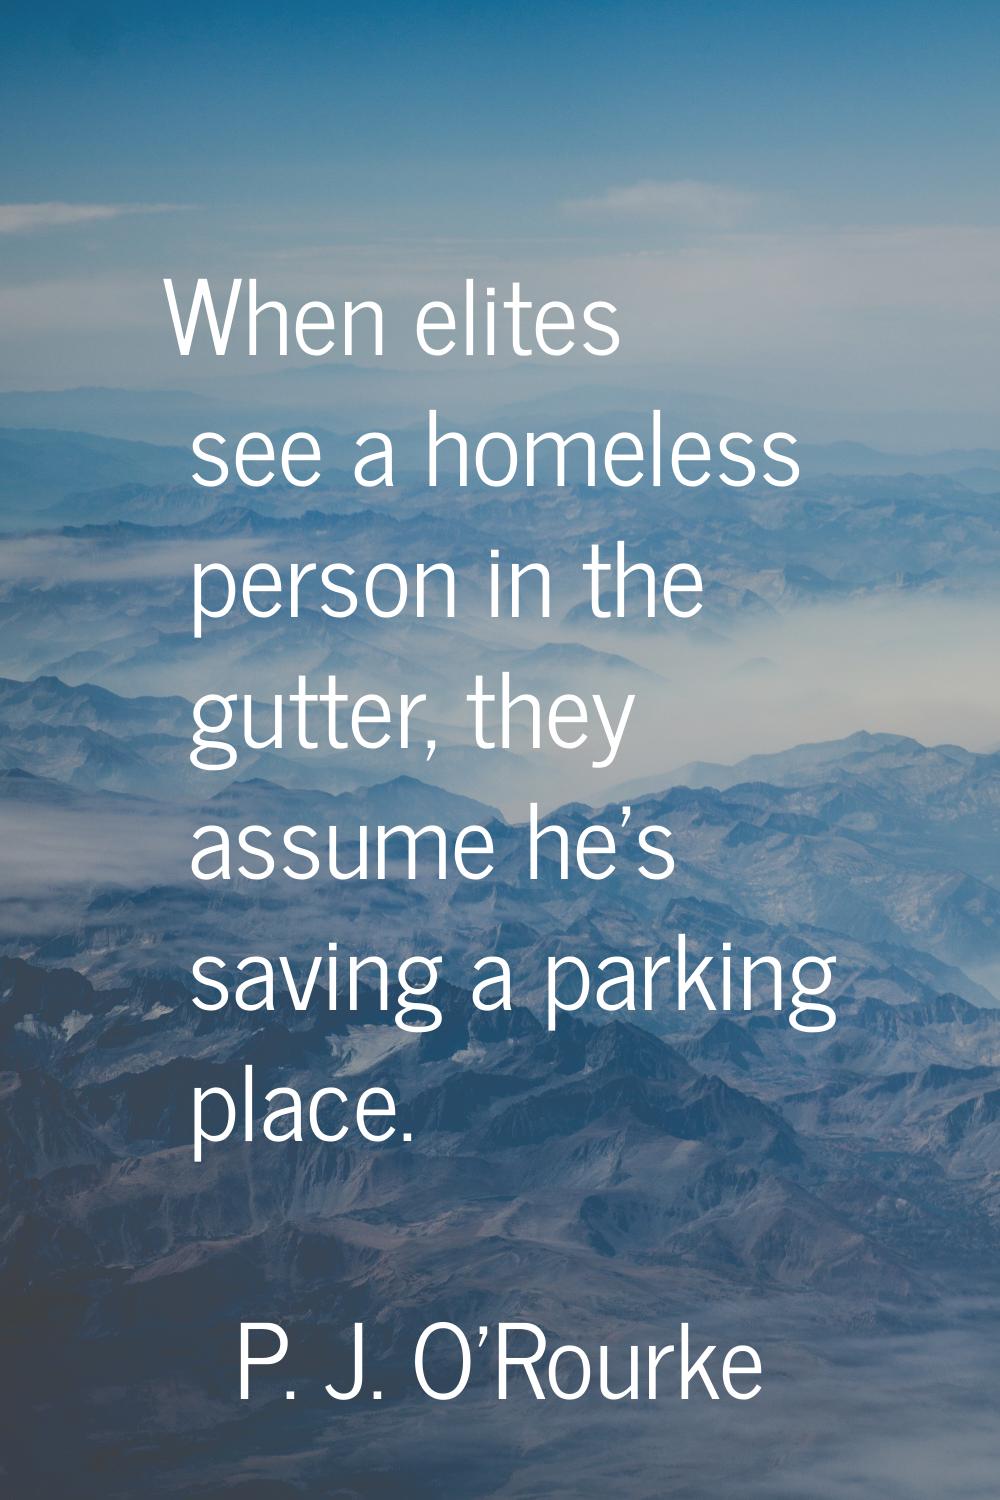 When elites see a homeless person in the gutter, they assume he's saving a parking place.